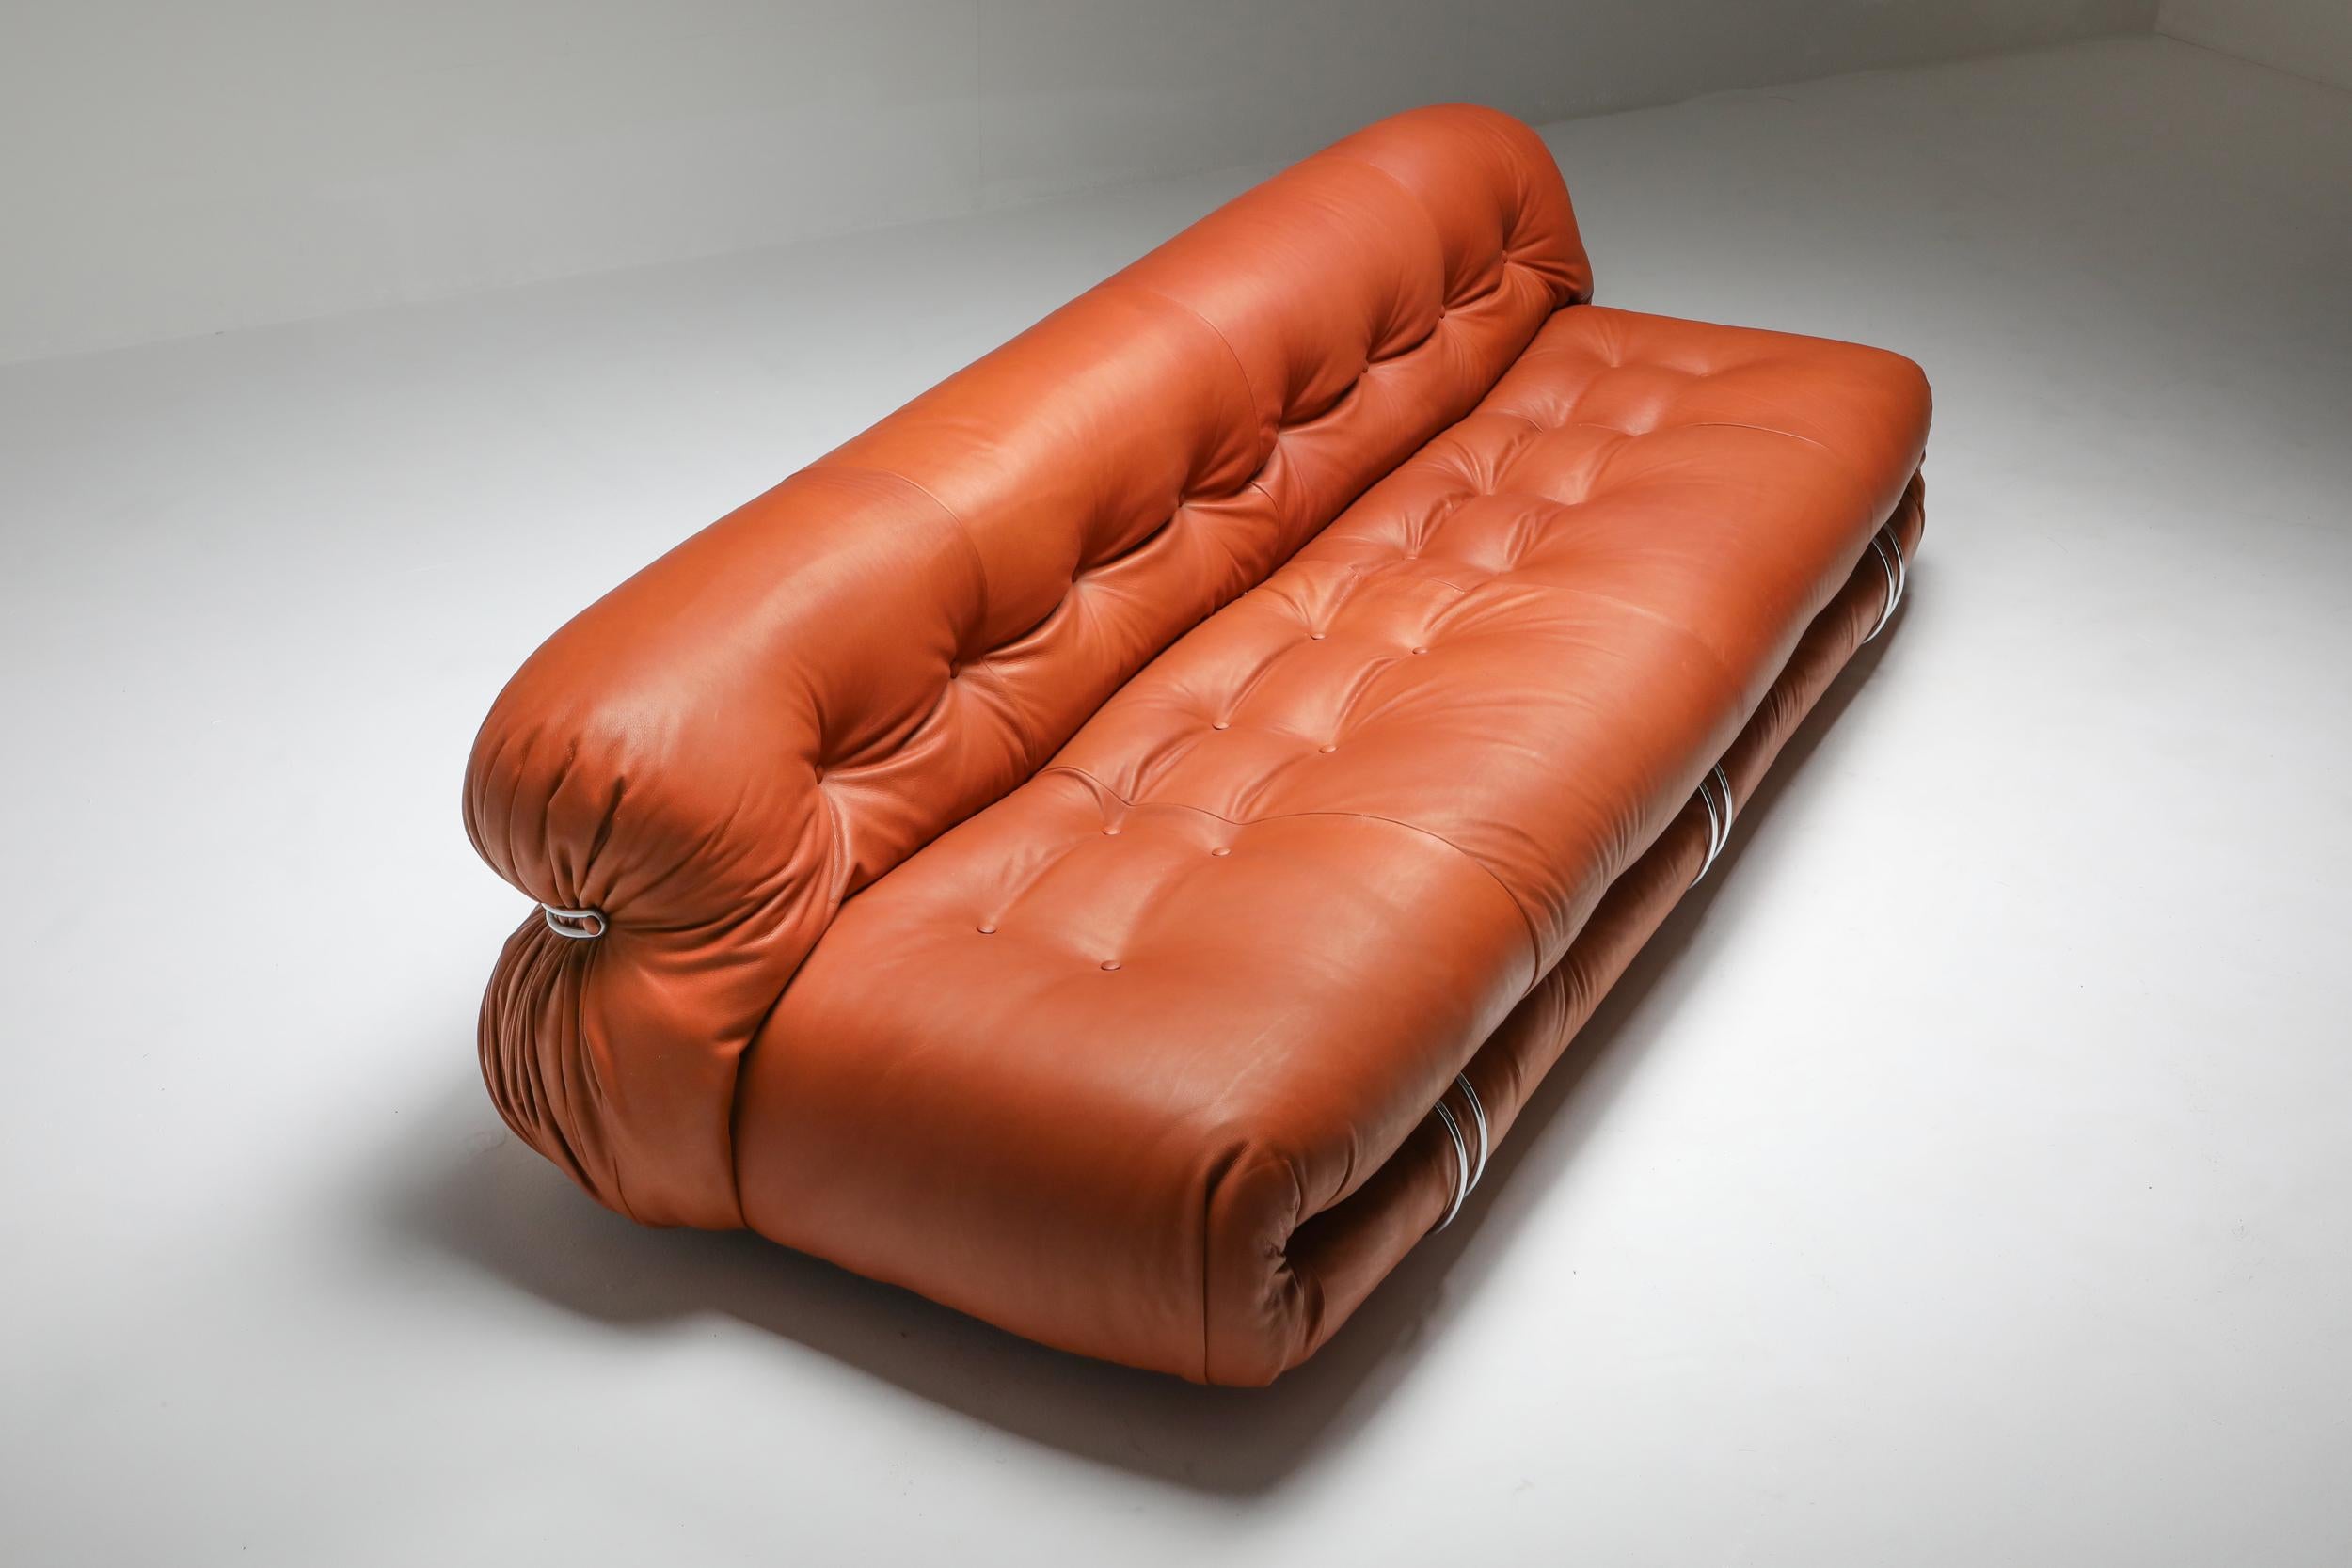 Post-Modern Cassina 'Soriana' Cognac Leather Sofa by Afra and Tobia Scarpa